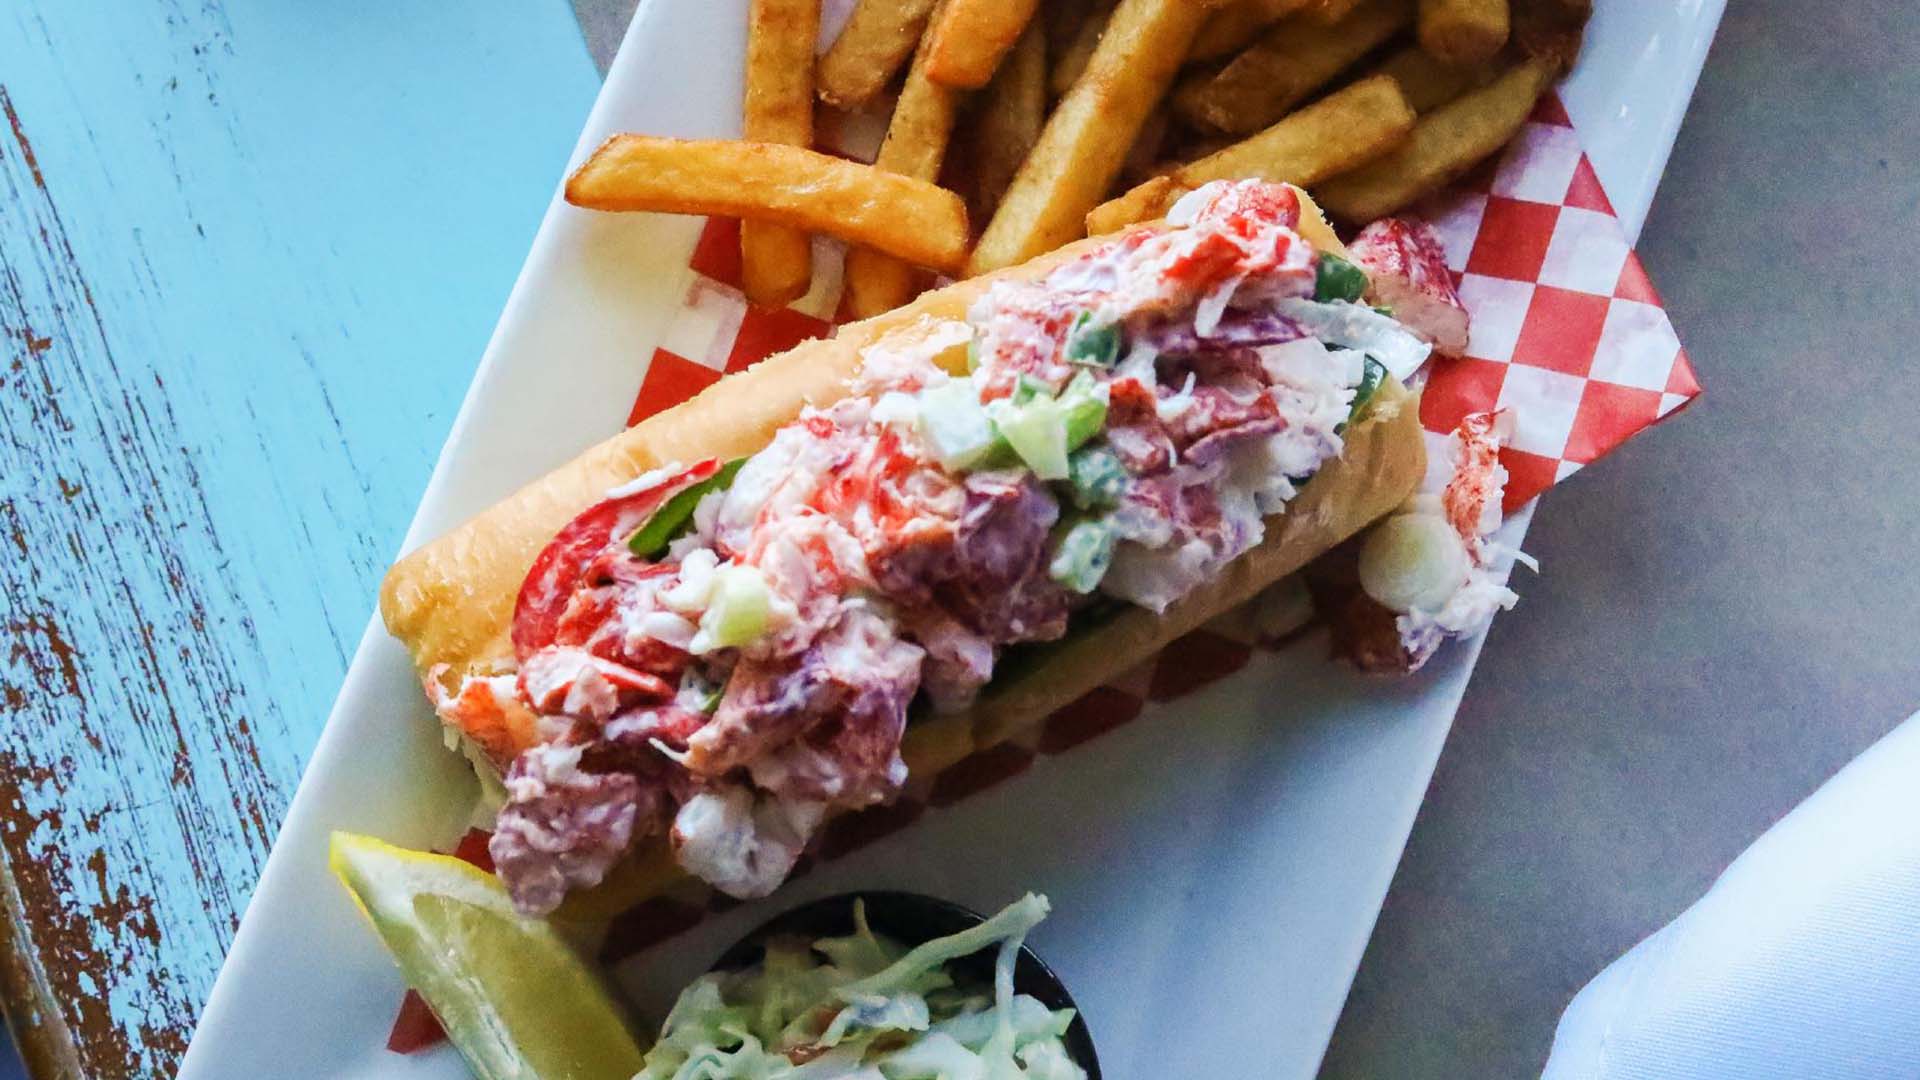 Lobster rolls and sunglasses coming to Pier Village in Long Branch